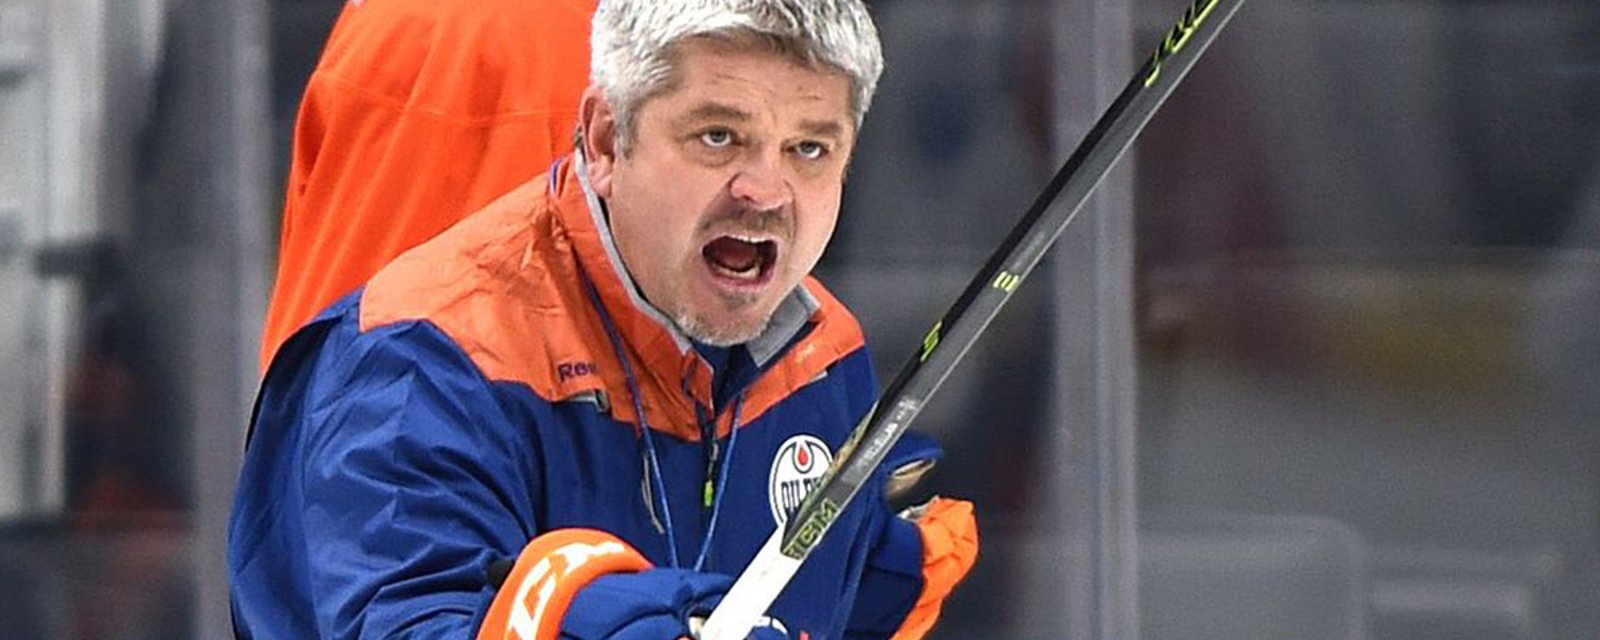 Former Oilers coach McLellan lashes out at GM Chiarelli over firing